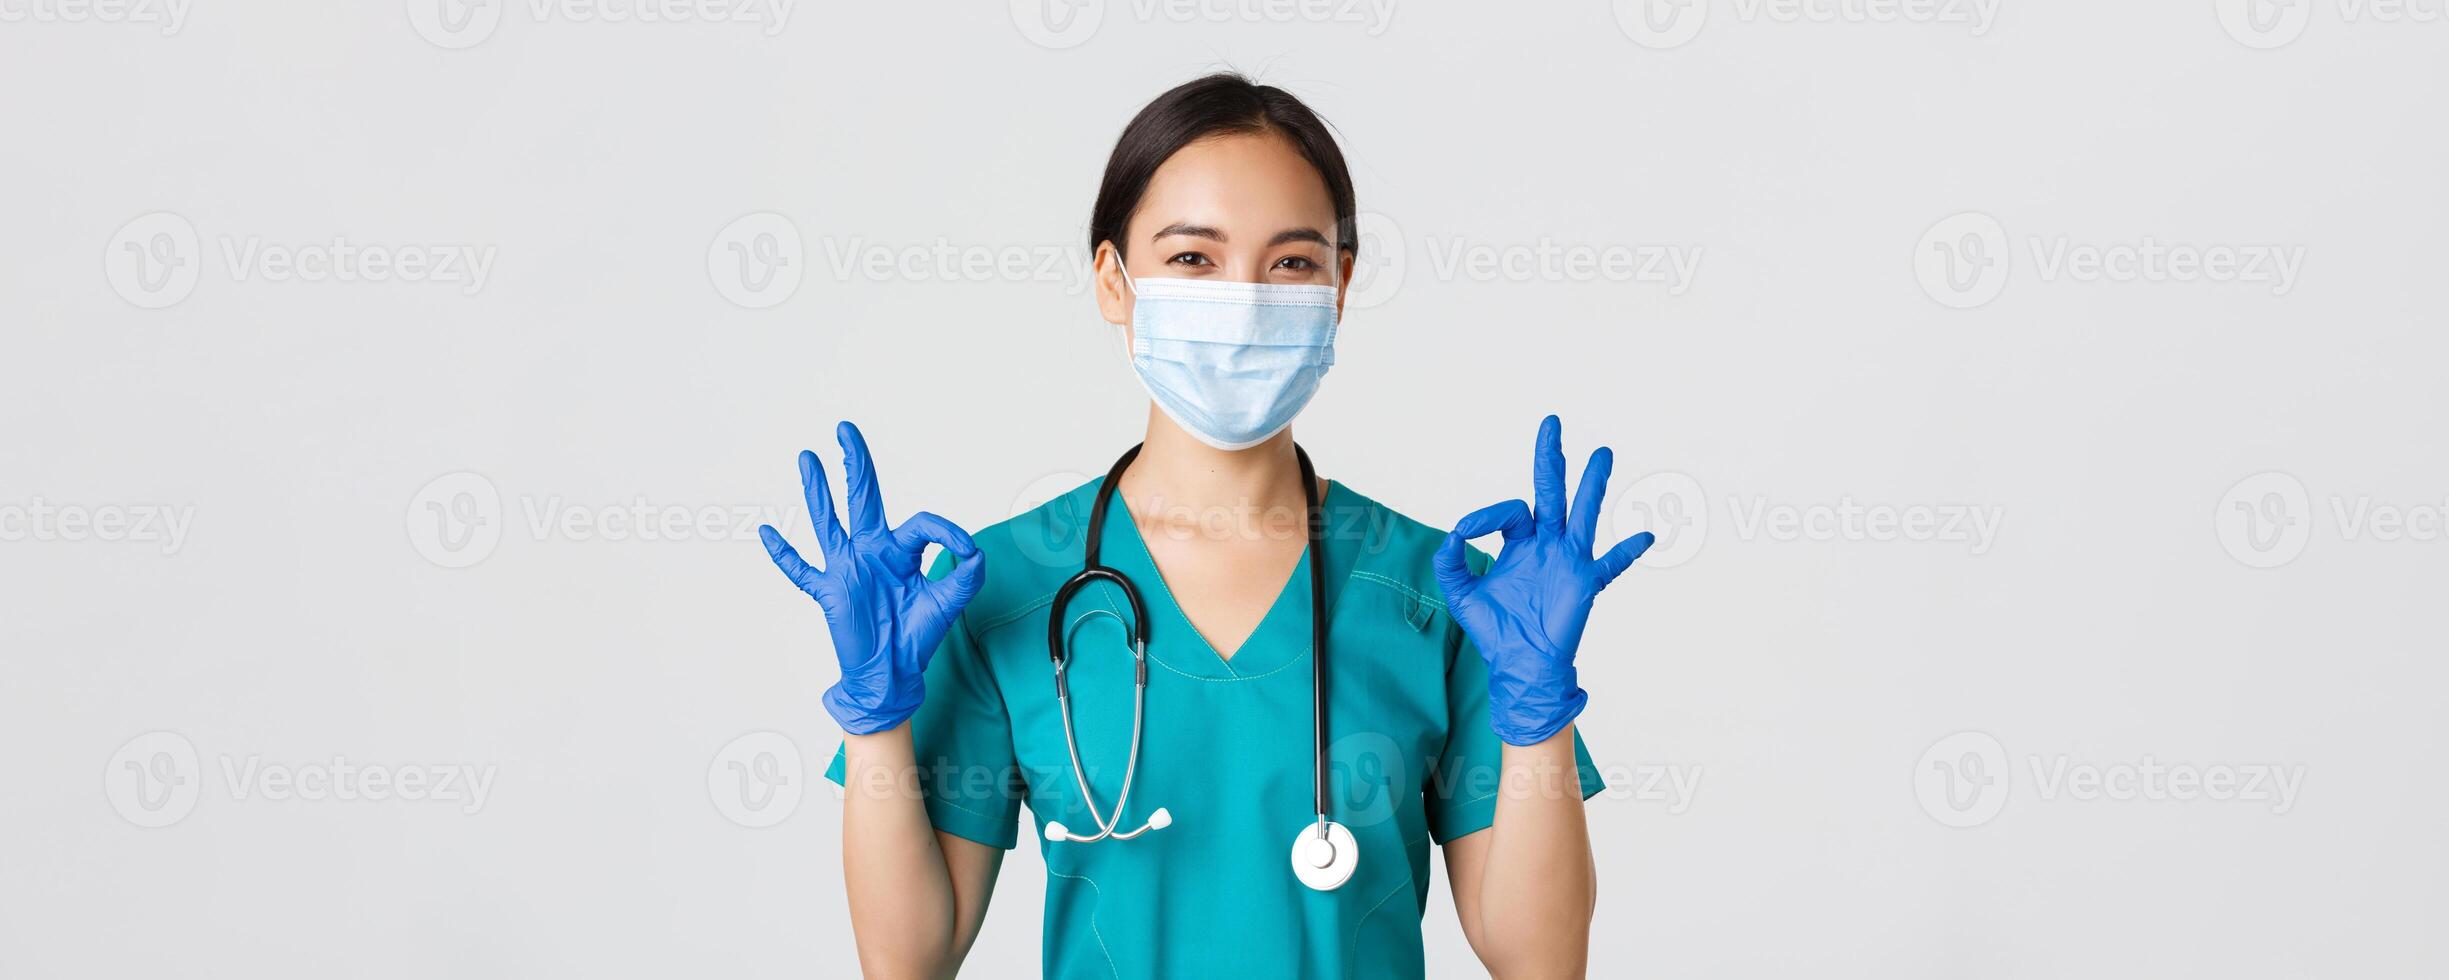 Covid-19, coronavirus disease, healthcare workers concept. Confident smiling asian female doctor, nurse in medical mask and gloves, show okay gesture in approval, white background photo